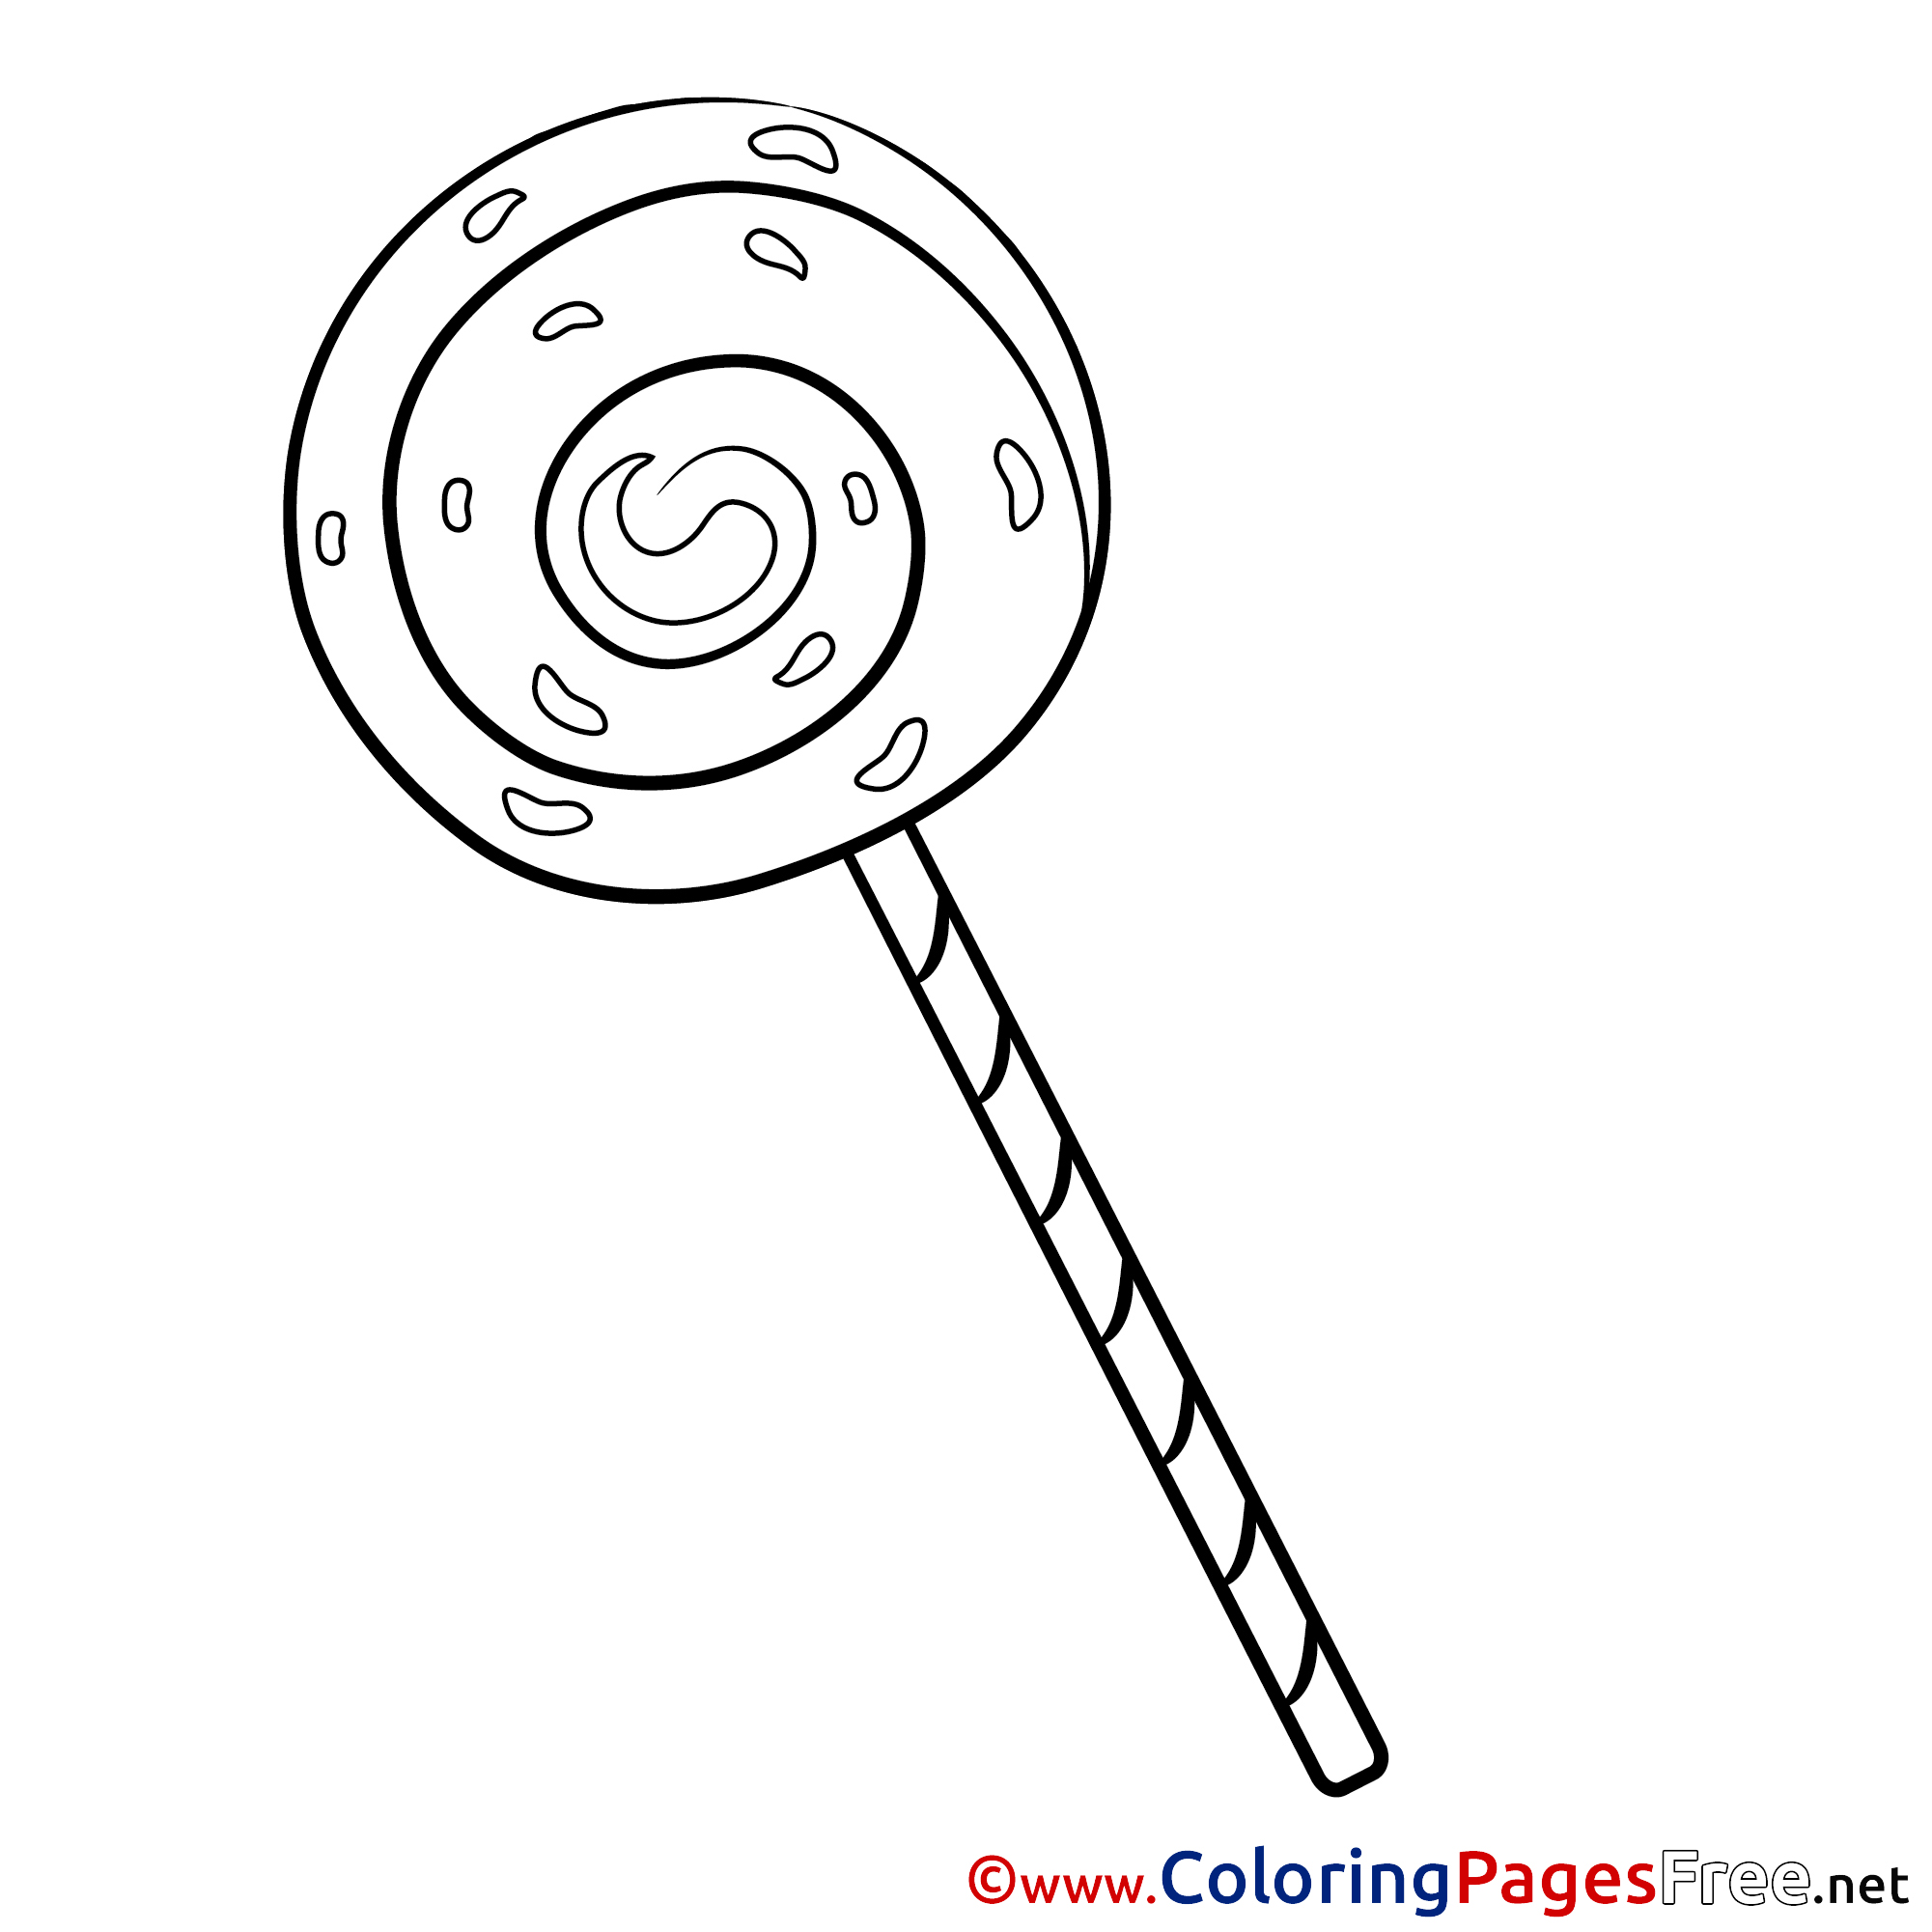 lollipop-for-kids-printable-colouring-page